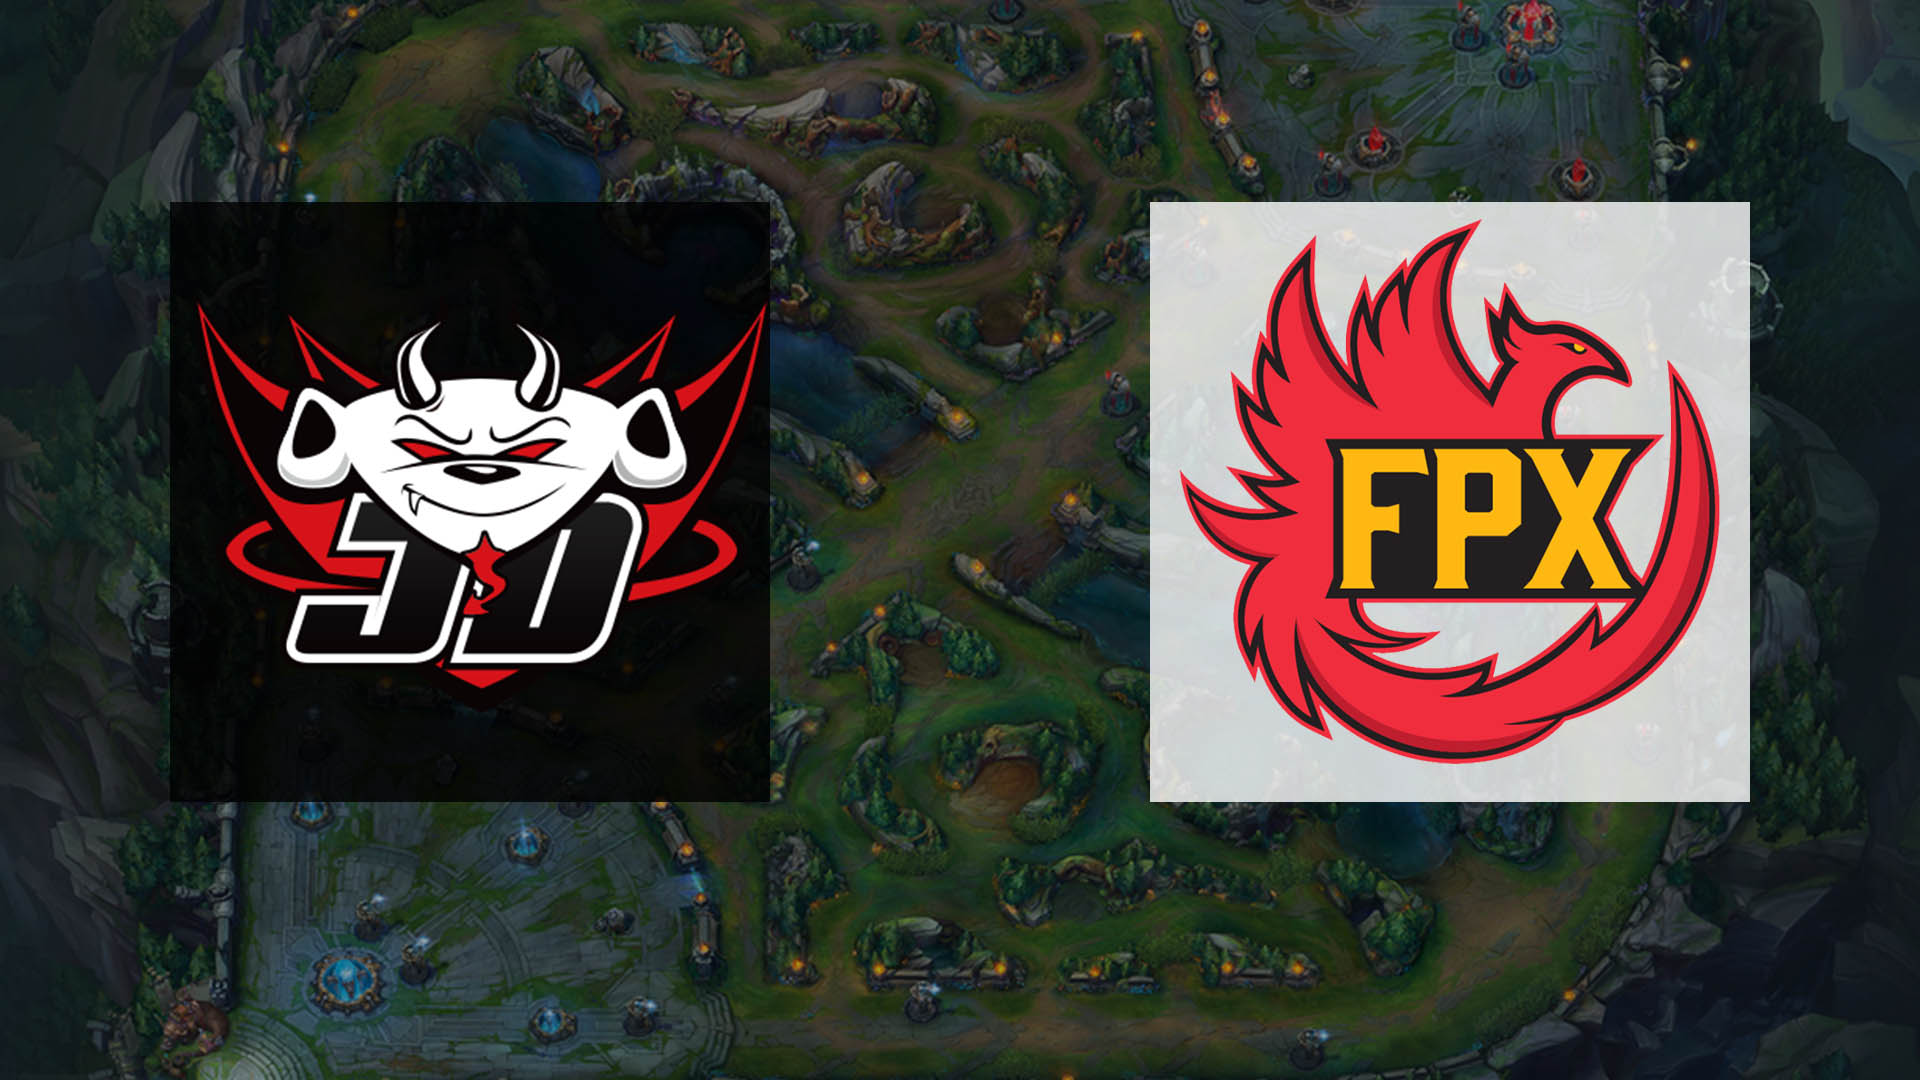 FPX vs EDG - LPL Finals Preview - Who's winning it all?